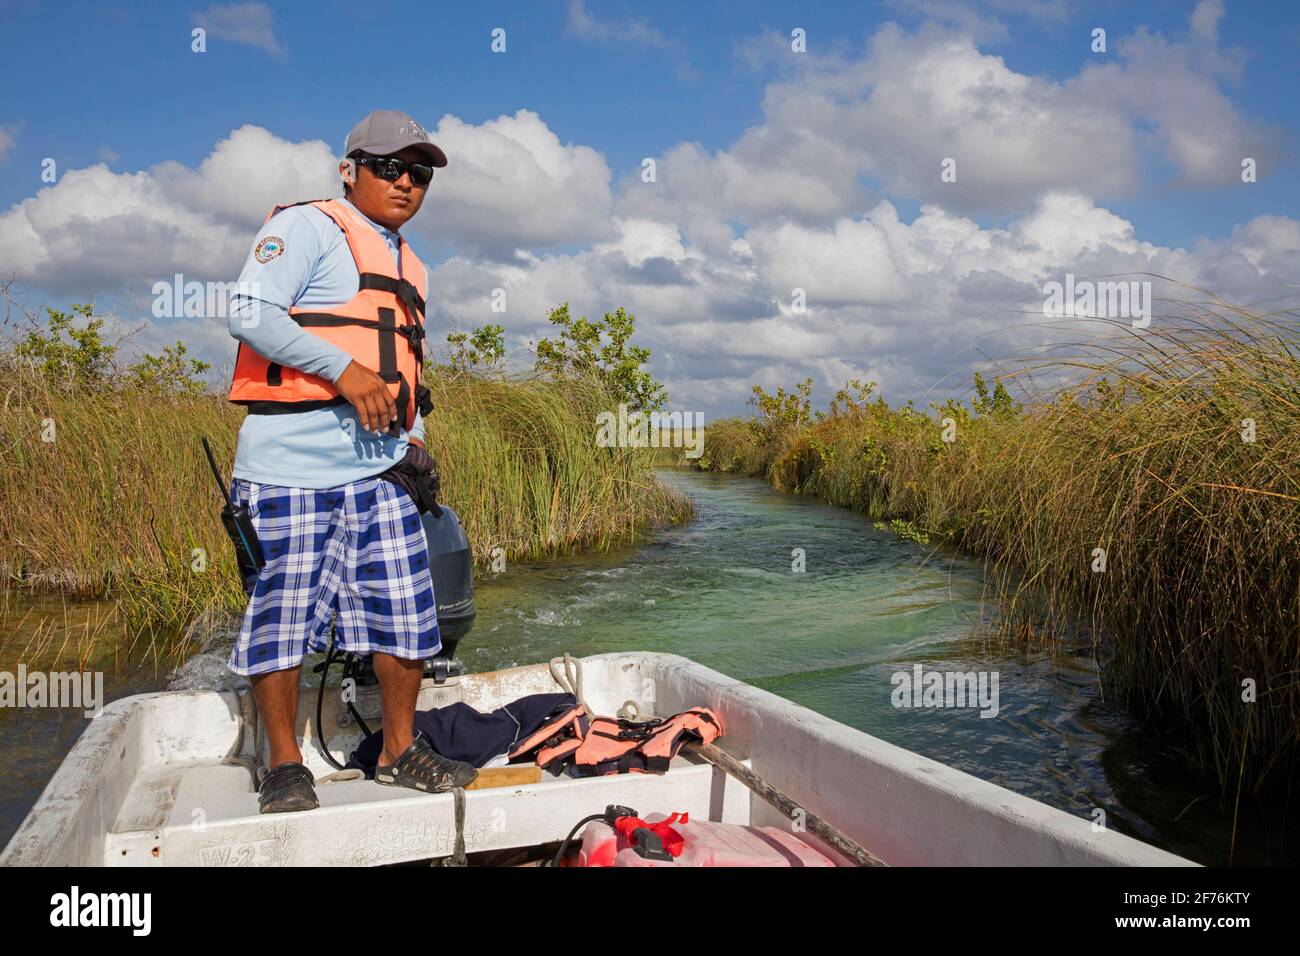 Guide in tourist boat during wildlife tour in the Sian Ka'an Biosphere Reserve, Riviera Maya, Tulum, Quintana Roo, Yucatán Peninsula, Mexico Stock Photo